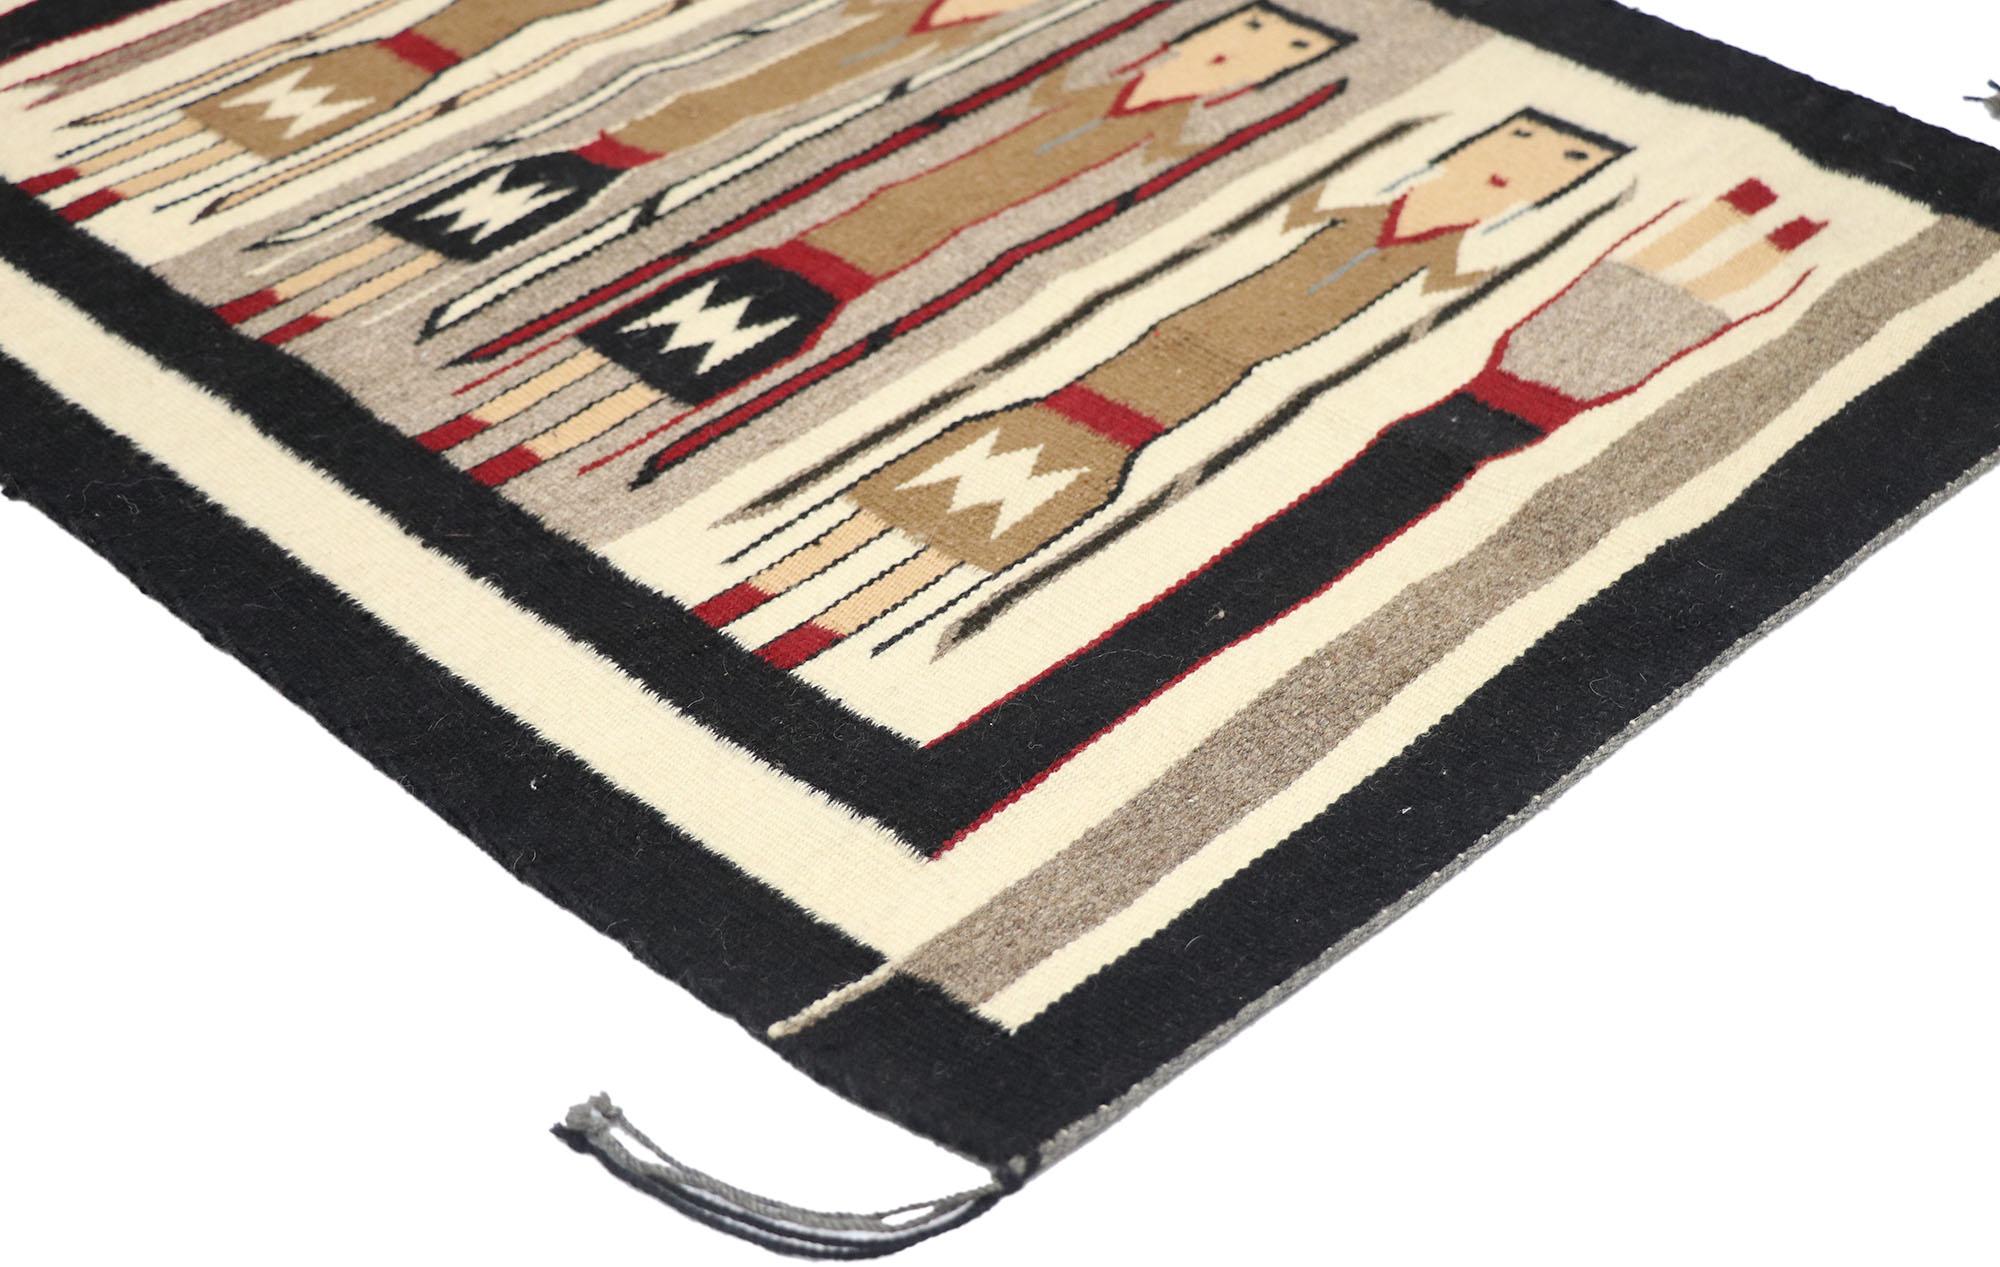 77871 Vintage Navajo Kilim Yeibichai rug with Southwestern Folk Art Style 02'01 x 02'10. Full of tiny details and a bold expressive design combined with neutral colors and tribal style, this hand-woven wool vintage Navajo Kilim Yeibichai rug is a